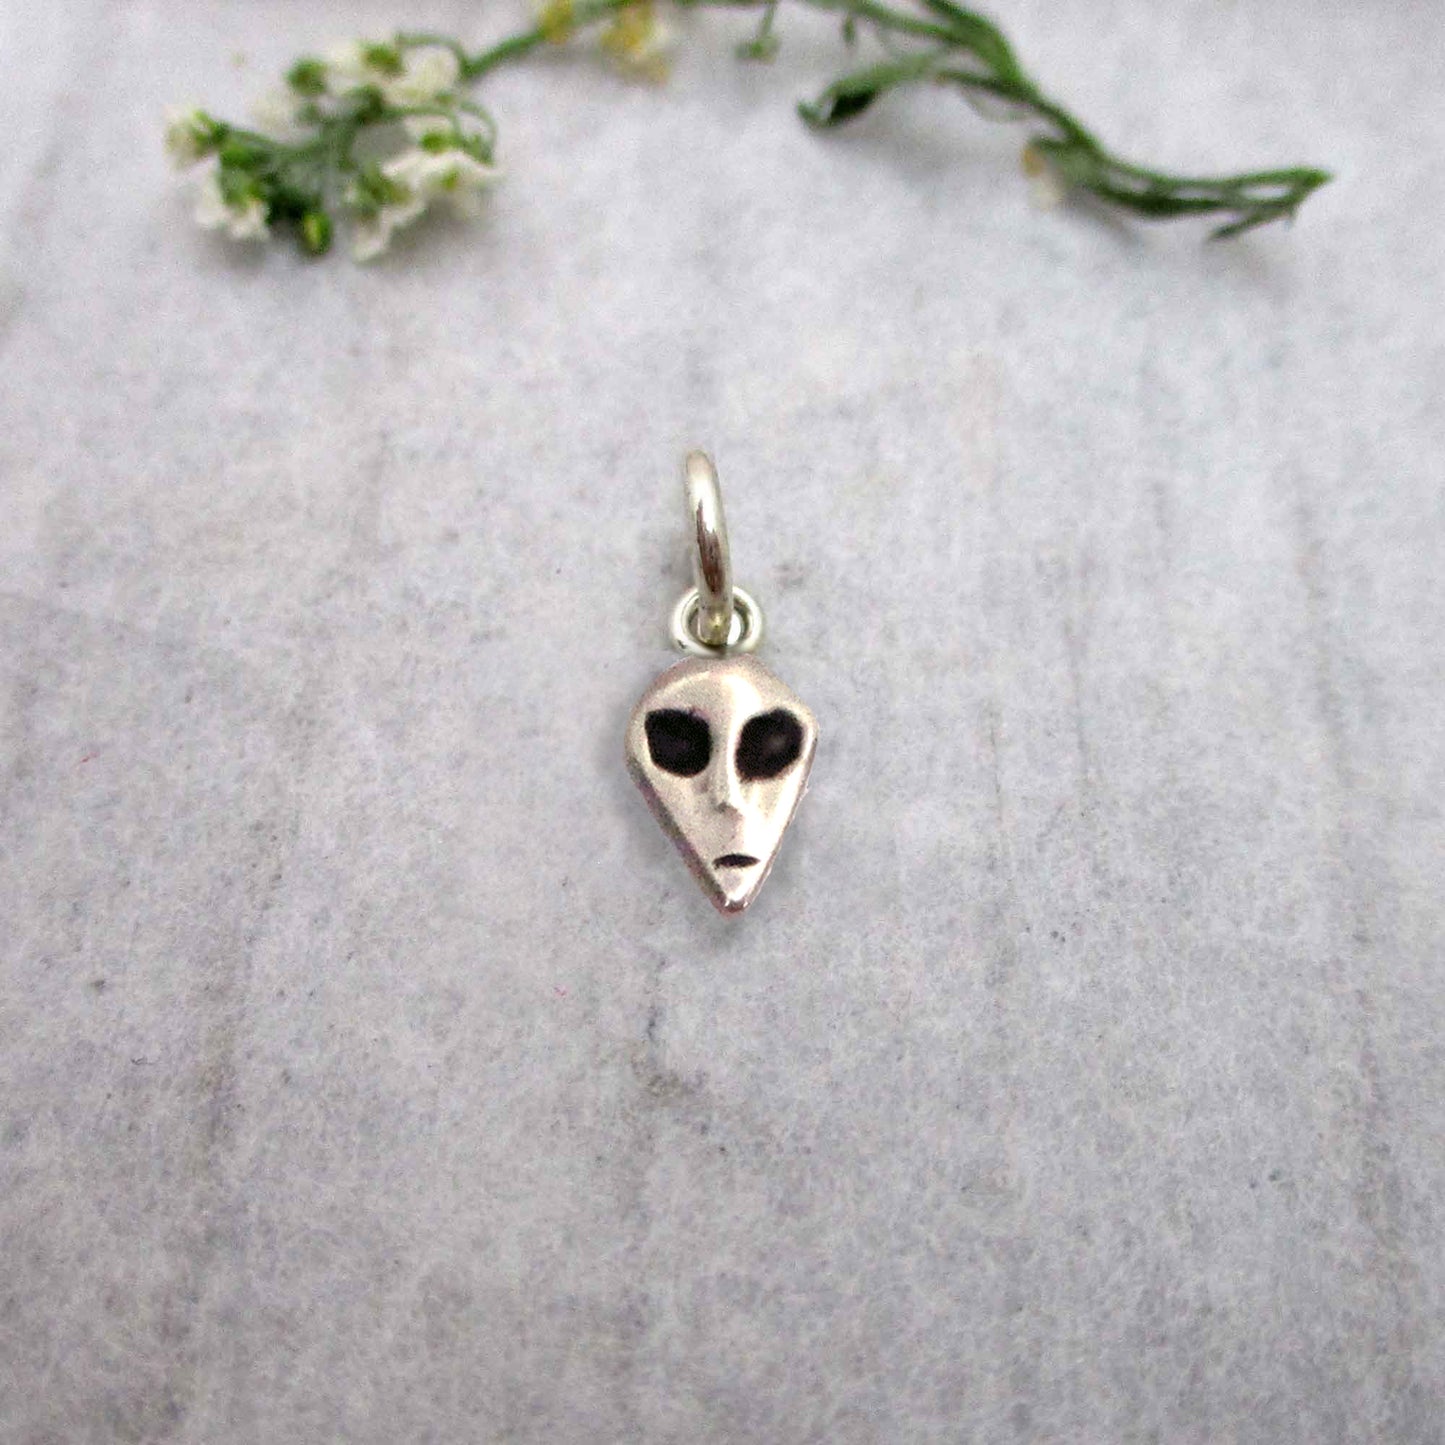 Tiny Alien Necklace in Sterling Silver